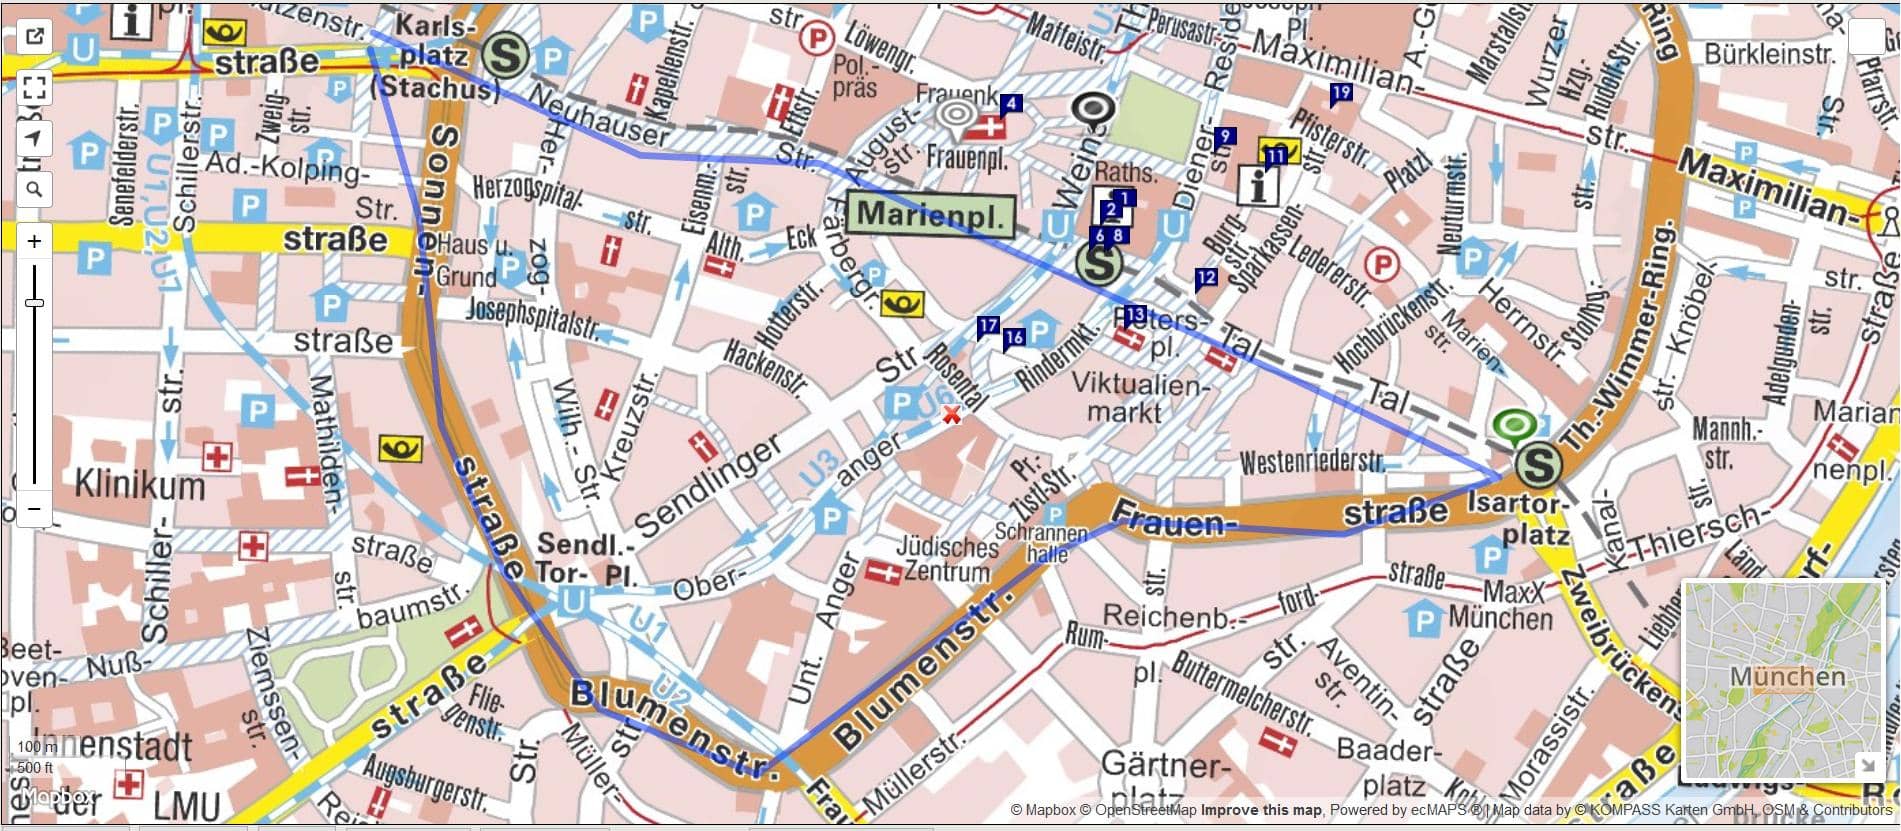 Map with GPX Route Marked in Blue